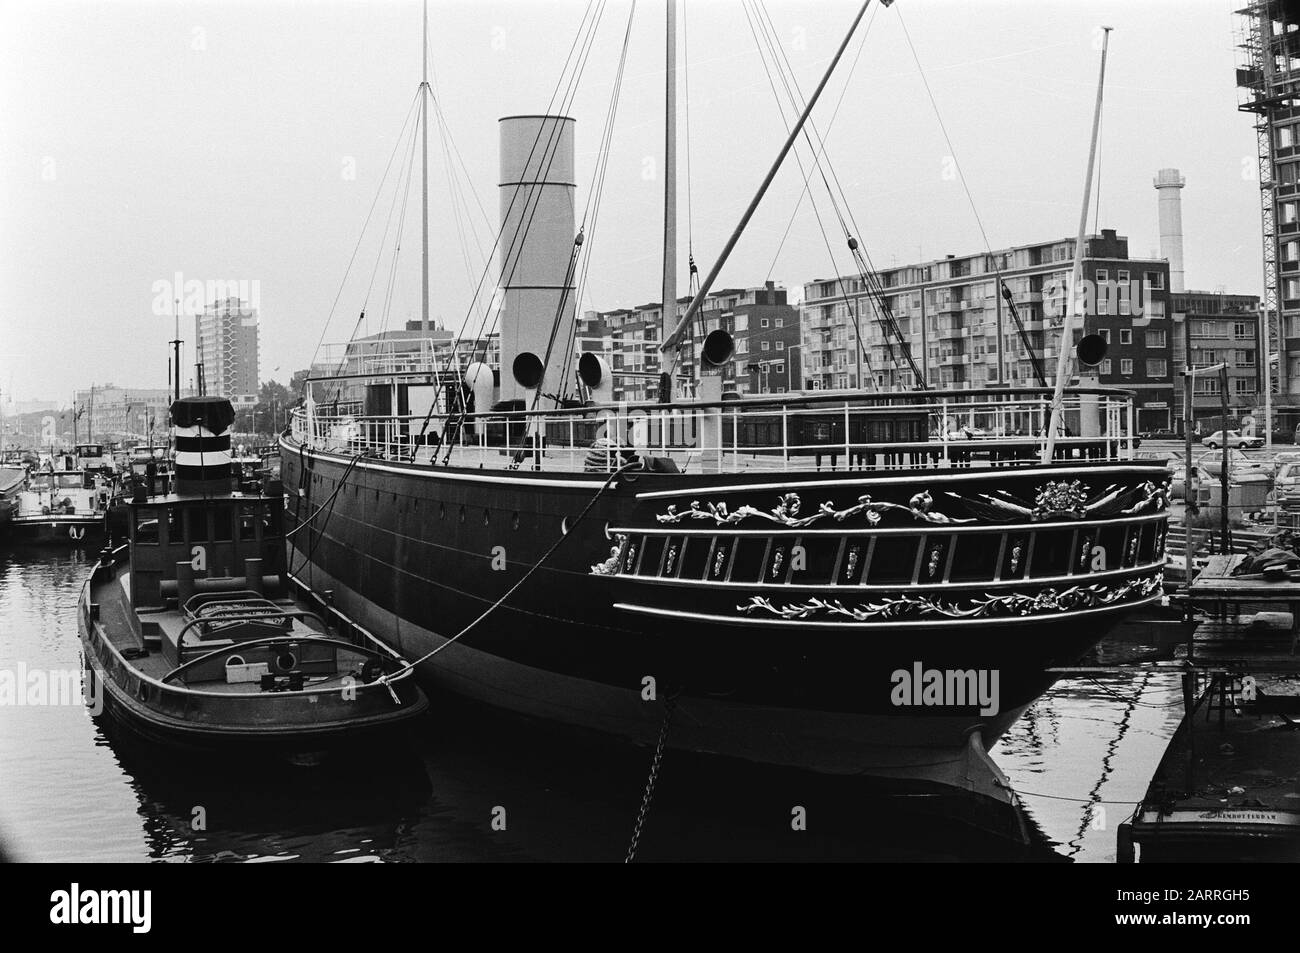 Armoured ship Buffalo decorated as museum ship  ships, museums, ports Date: 17 July 1979 Location: Rotterdam, South-Holland Keywords: ports, museums, ships Stock Photo